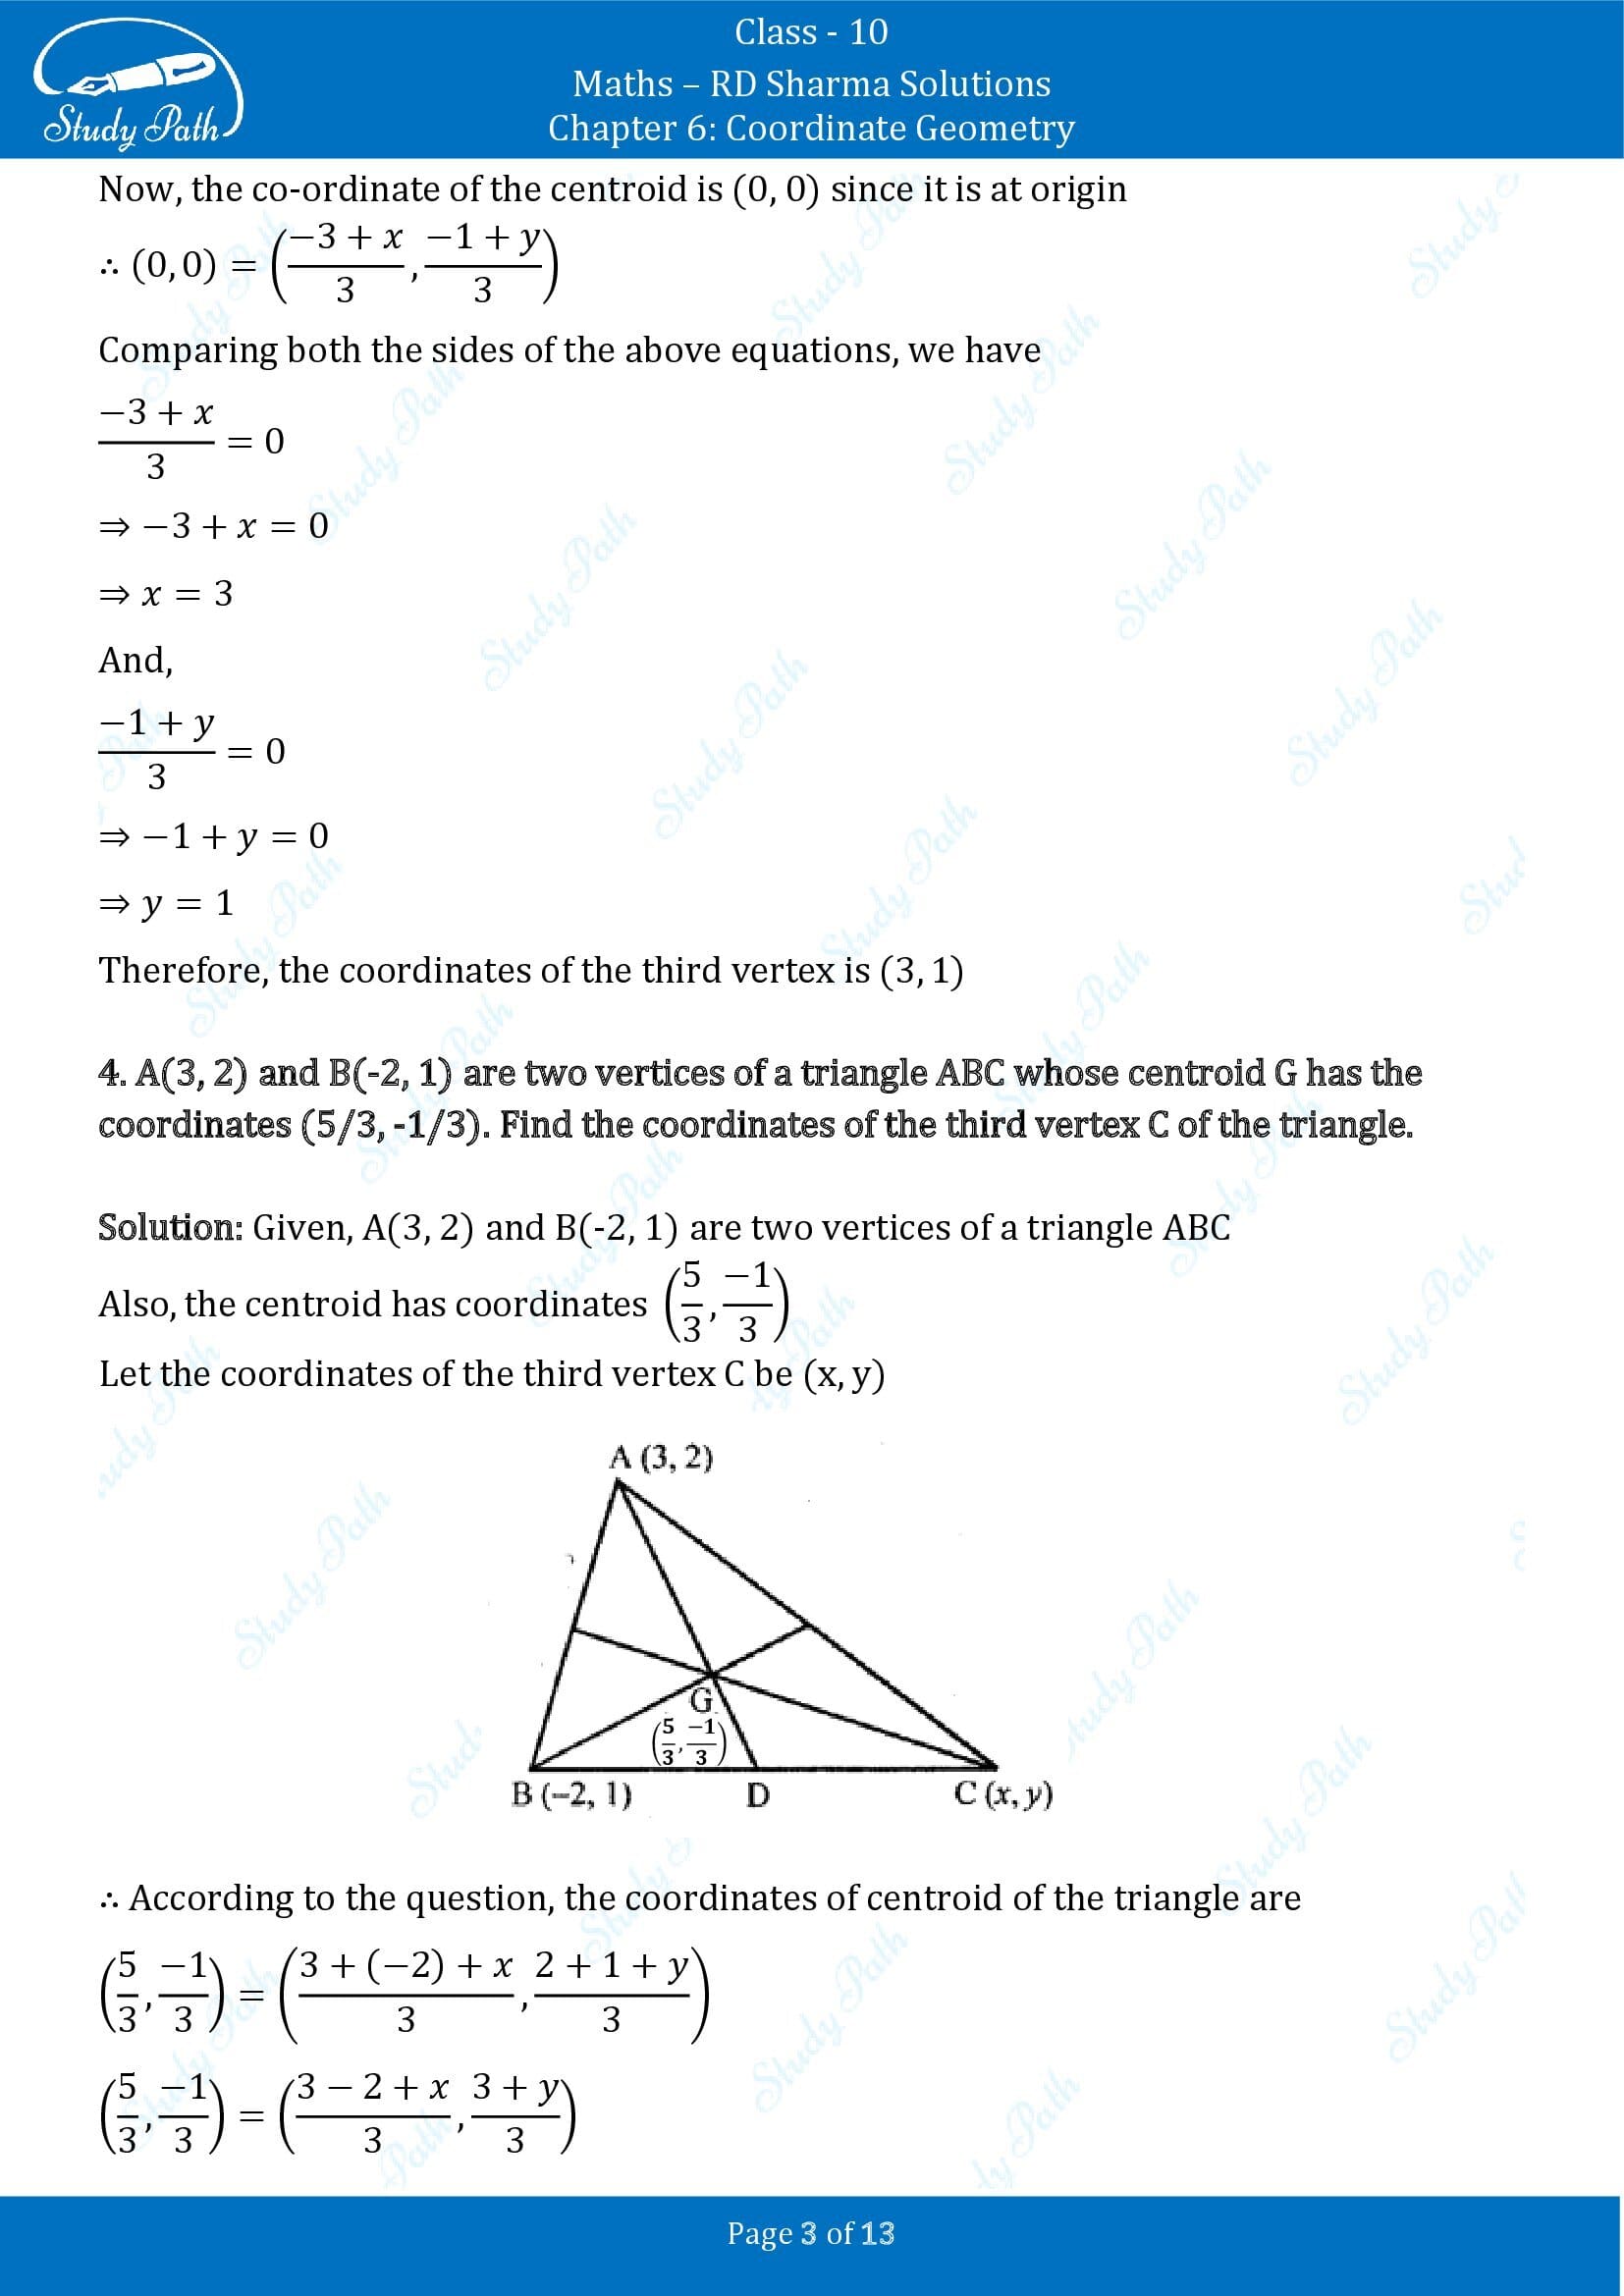 RD Sharma Solutions Class 10 Chapter 6 Coordinate Geometry Exercise 6.4 00003